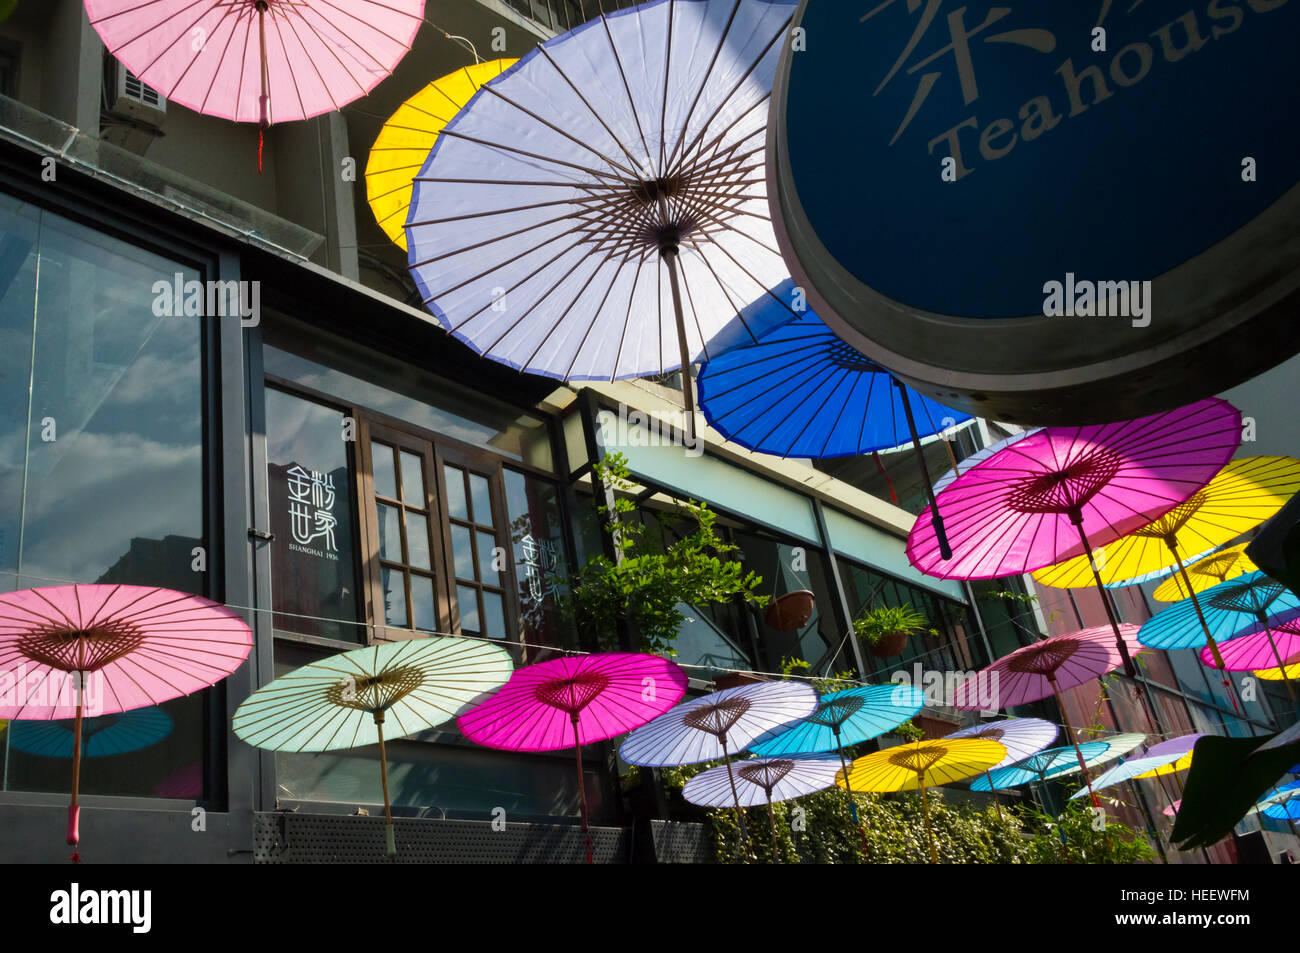 Umbrella decoration in Tianzifang, an arts and crafts enclave in the French Concession area, Shanghai, China Stock Photo